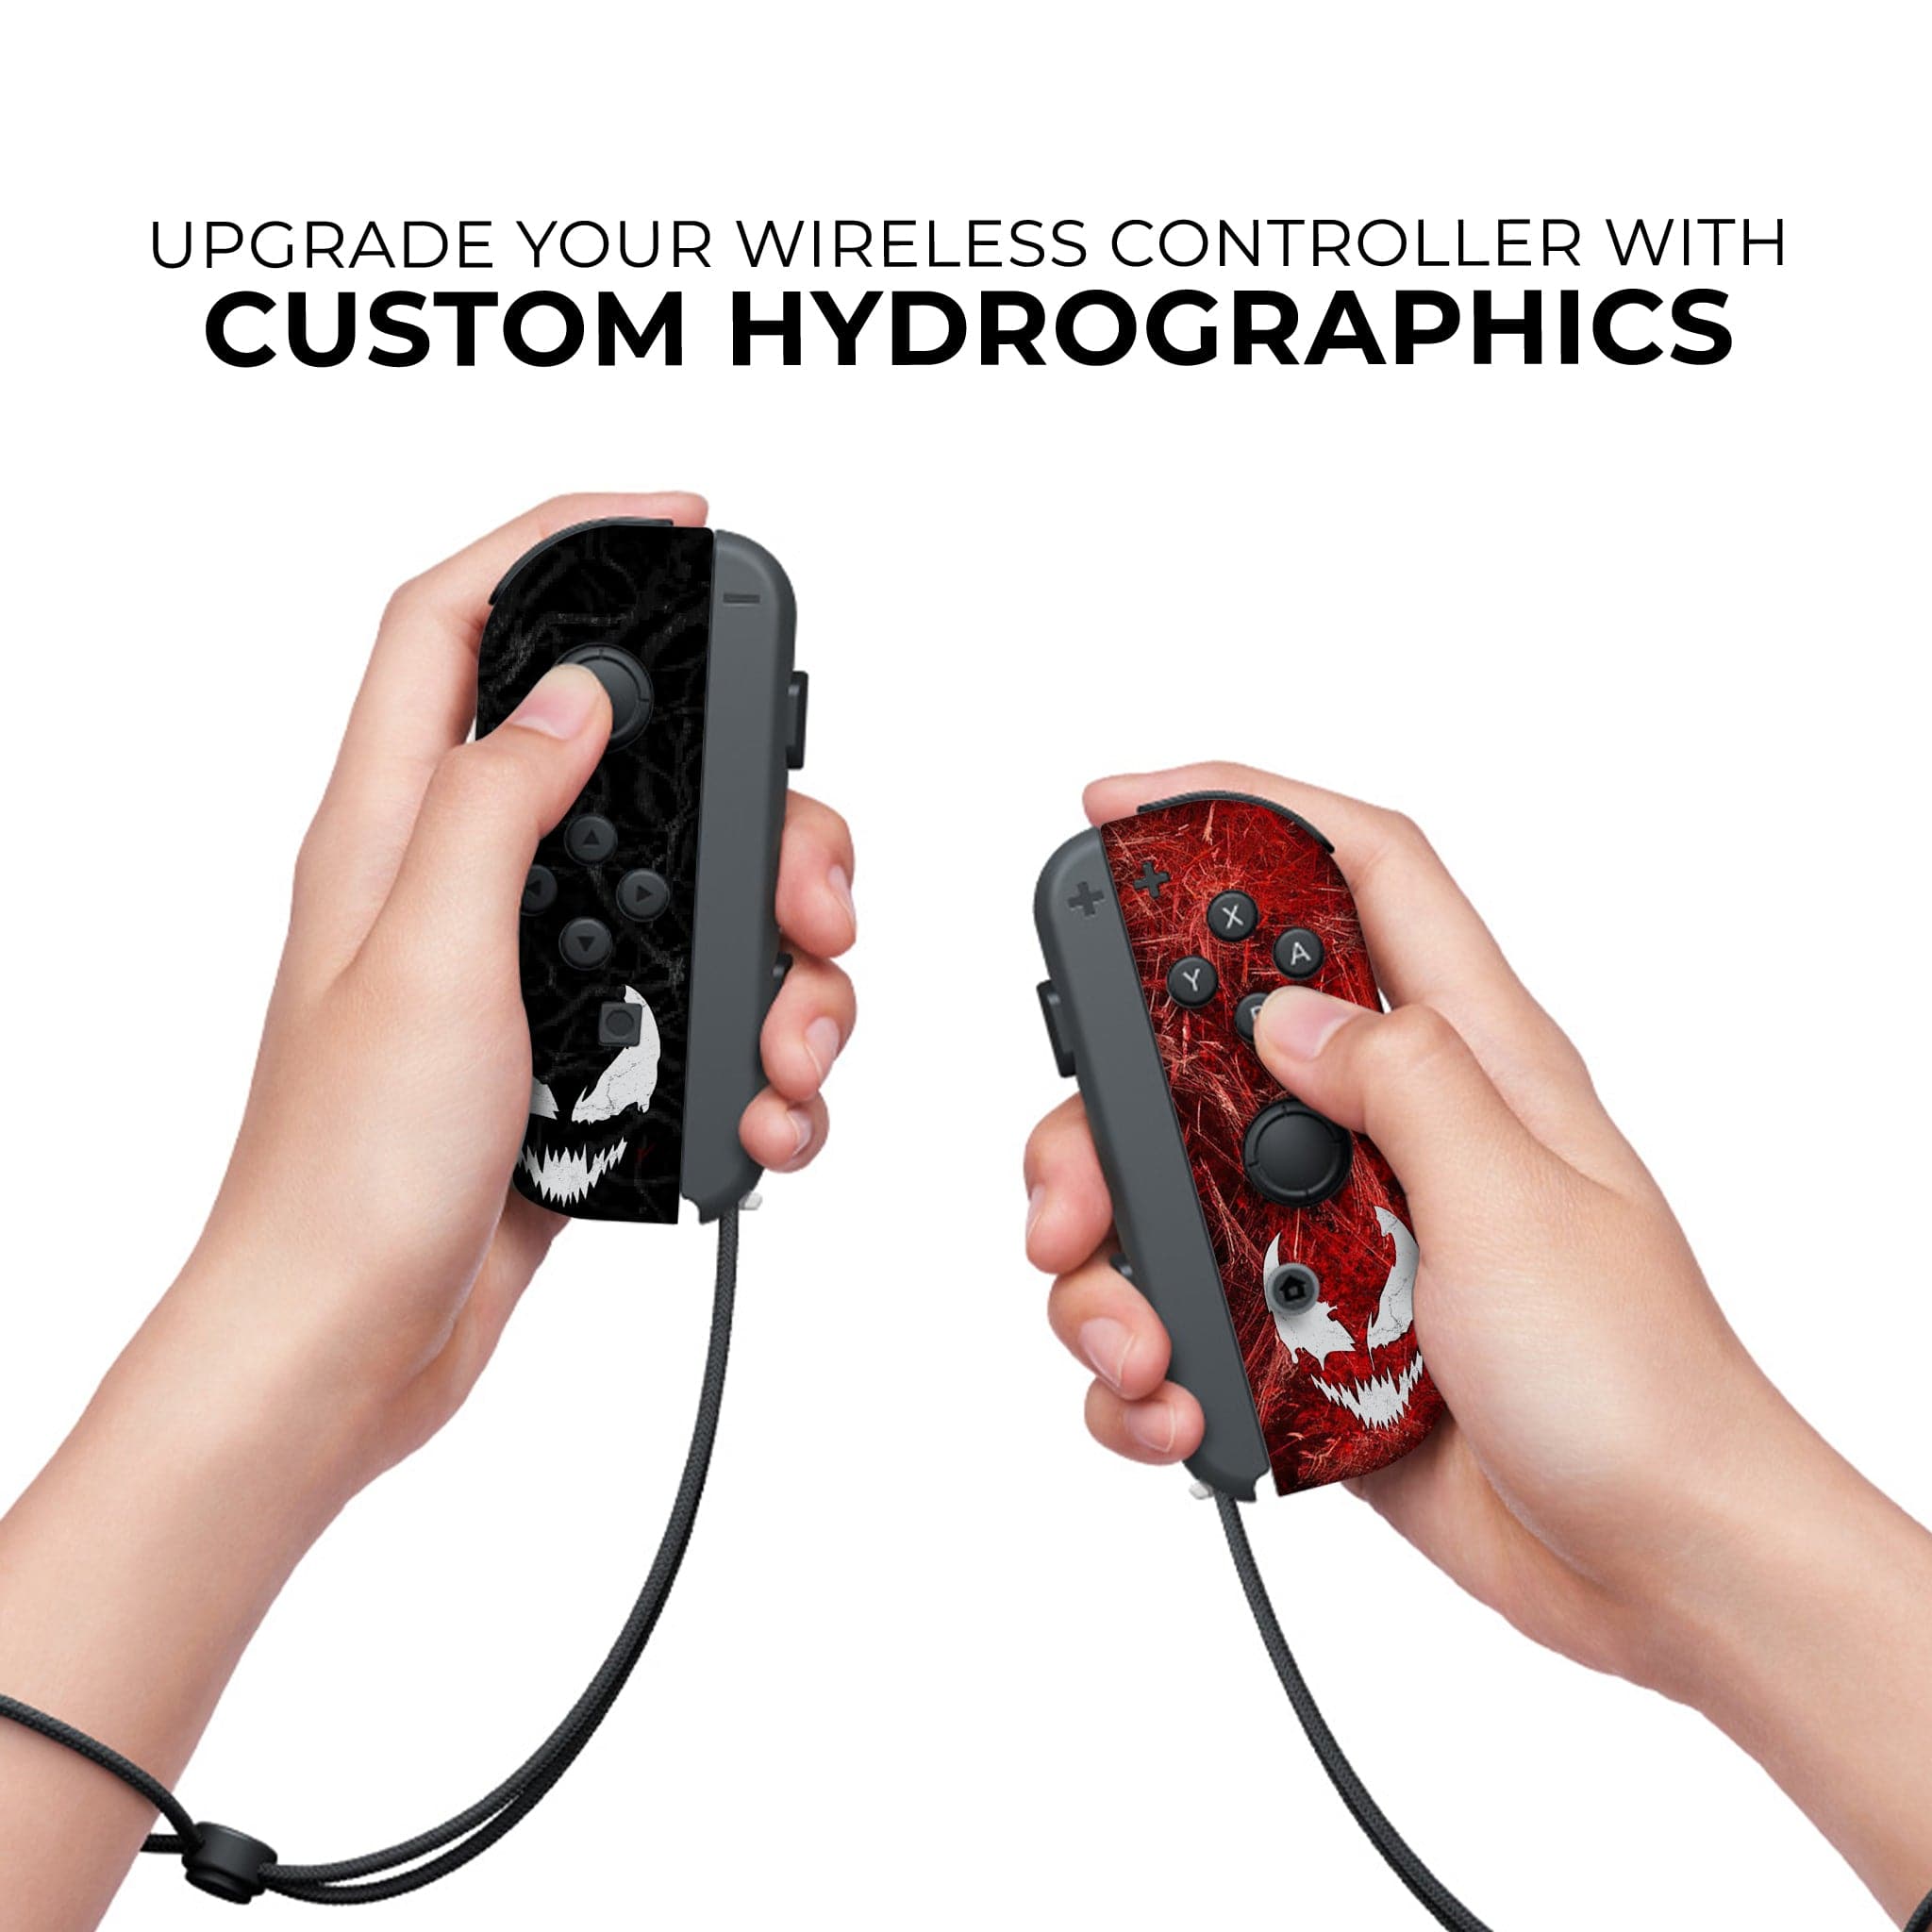 Venom & Carnage Joy-Con Left and Right Nintendo Switch Price Controllers